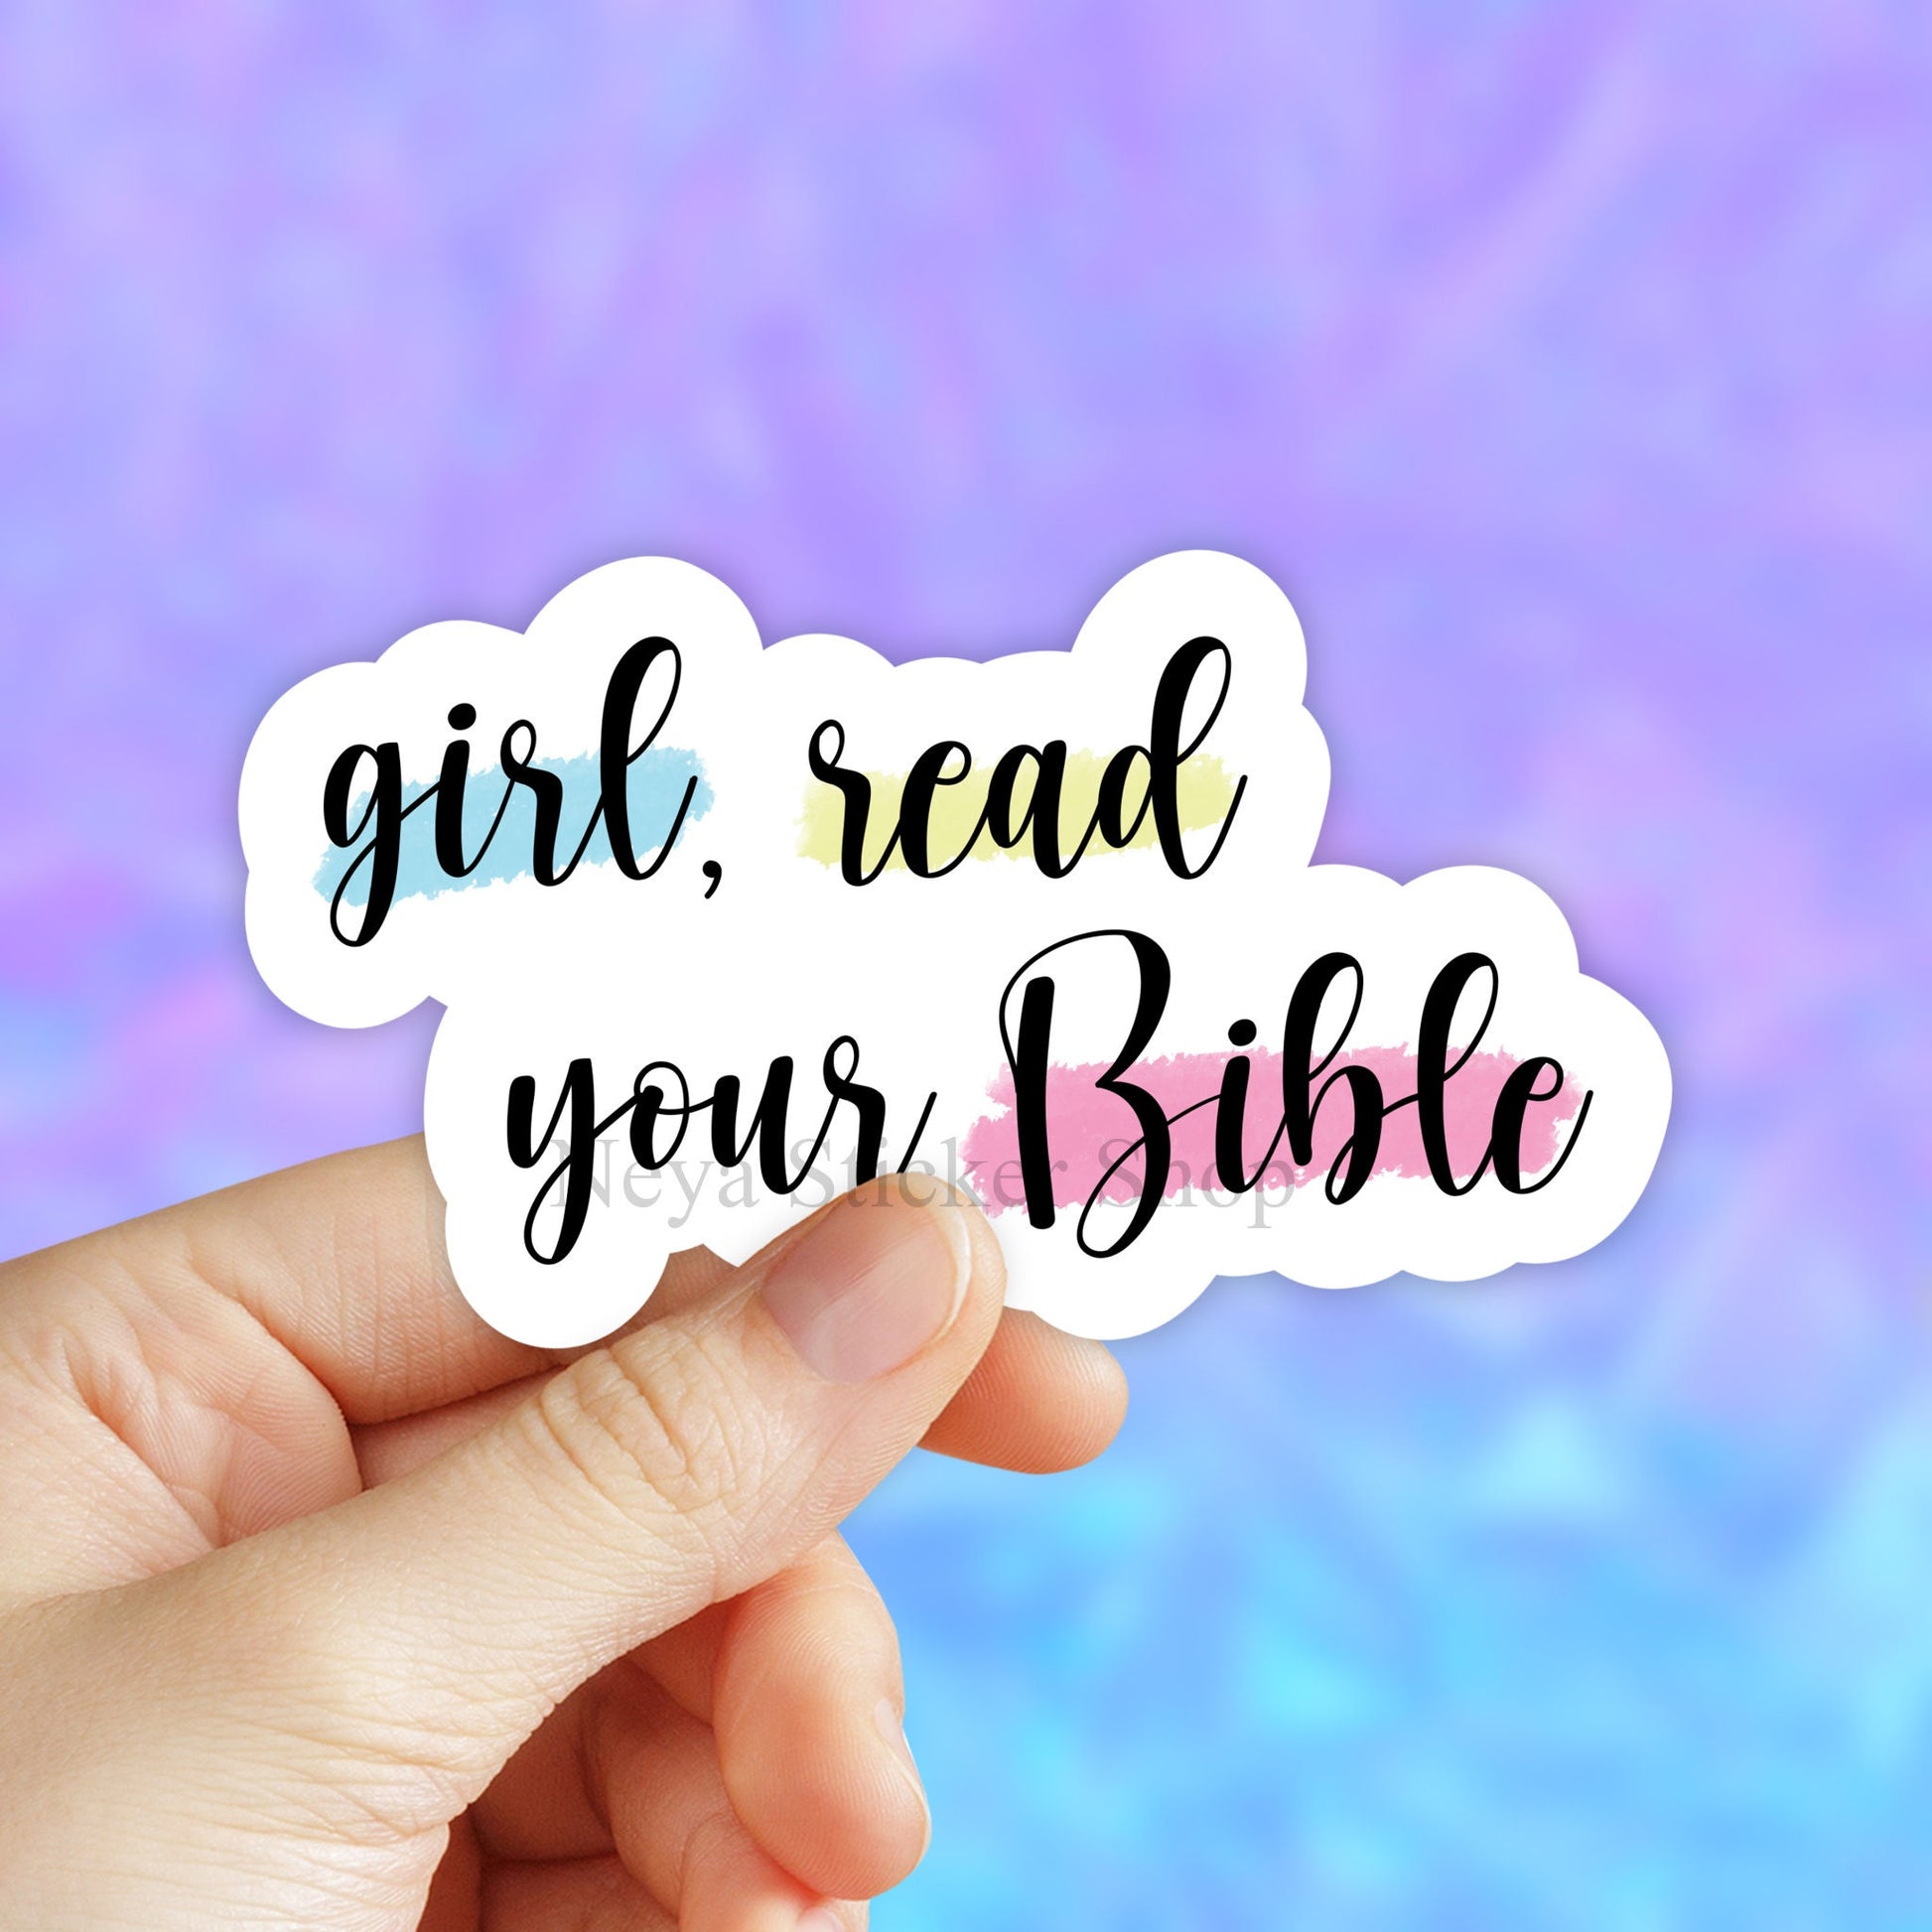 Wholesale Bible verse sticker, Christian stickers, Faith stickers for  your store